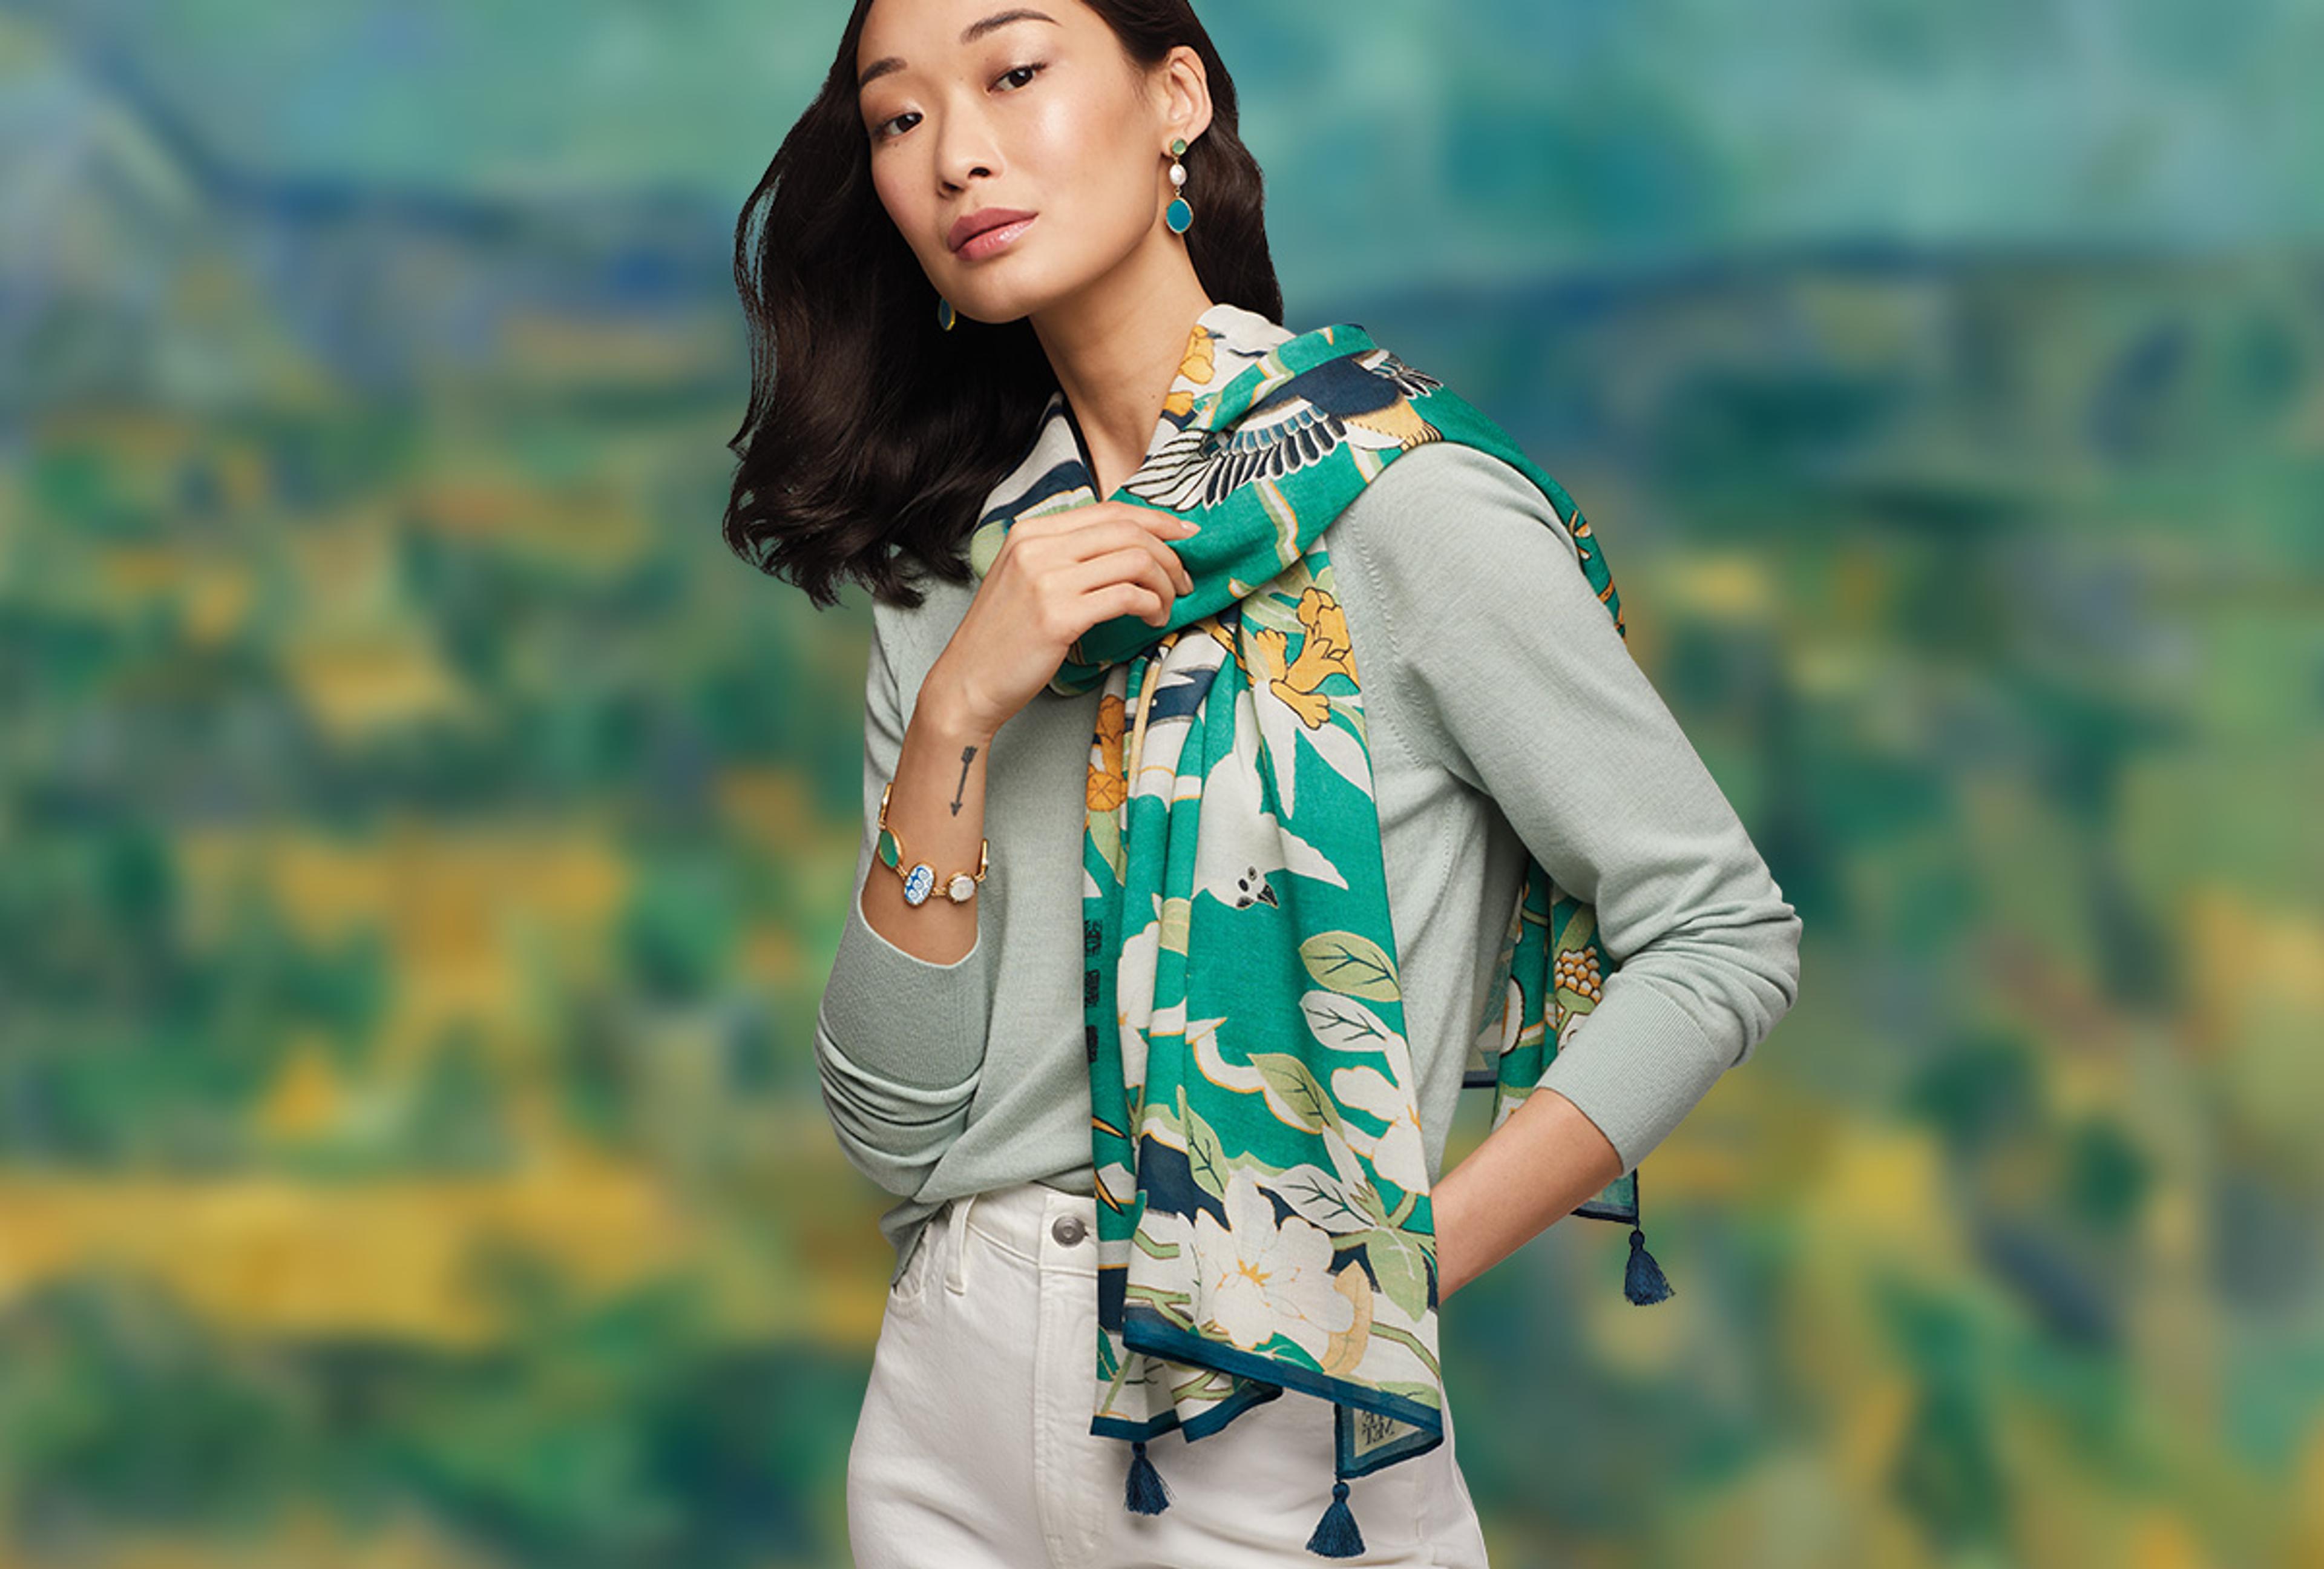 A young Asian woman models a green printed scarf against a green and blue blurred background.